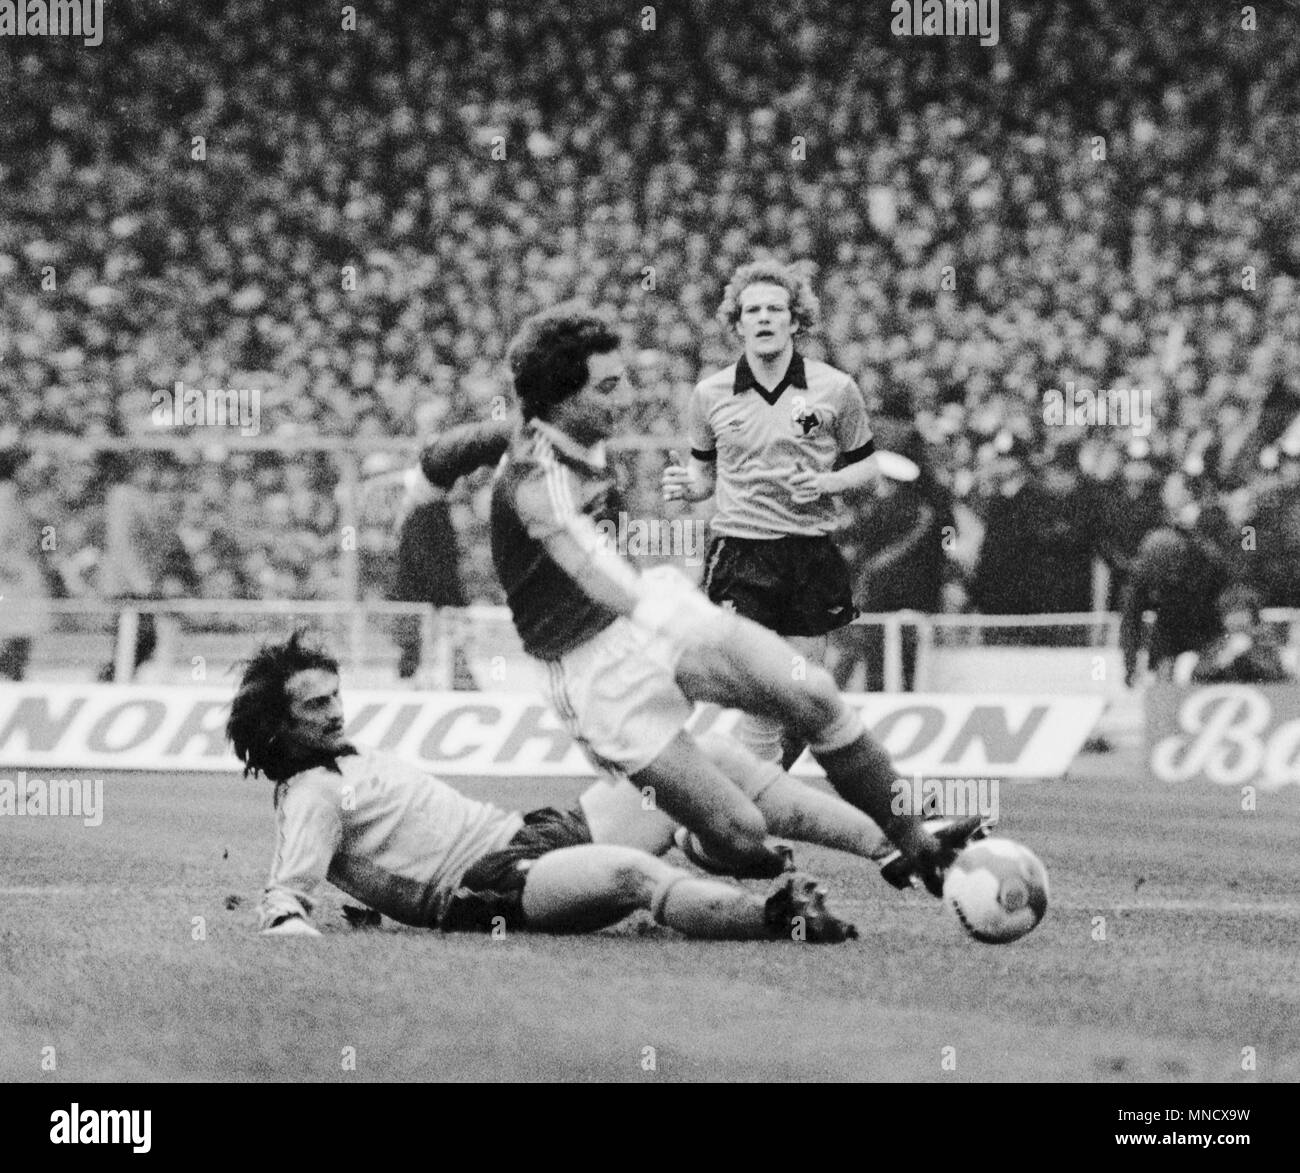 Martin O'Neill (c), in possession for Nottingham Forest, evades a sliding tackle from Kenny Hibbitt, of Wolverhampton Wanderers, as team-mate Andy Gray looks on during the Football League Cup final at Wembley. Stock Photo